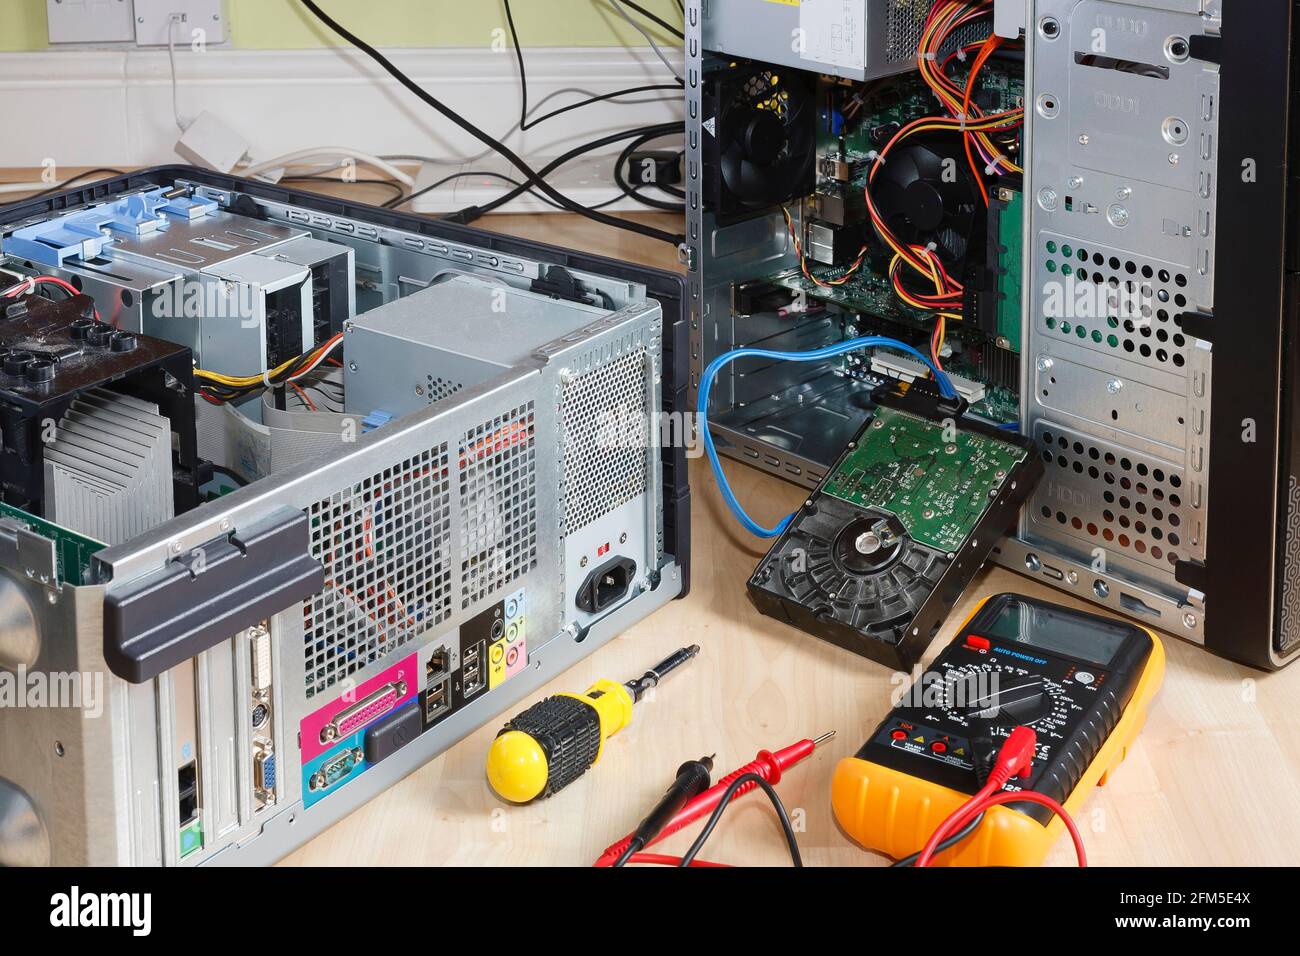 Open tower PC computers. Depicts computer repair, maintenance, service or upgrade in UK home Stock Photo